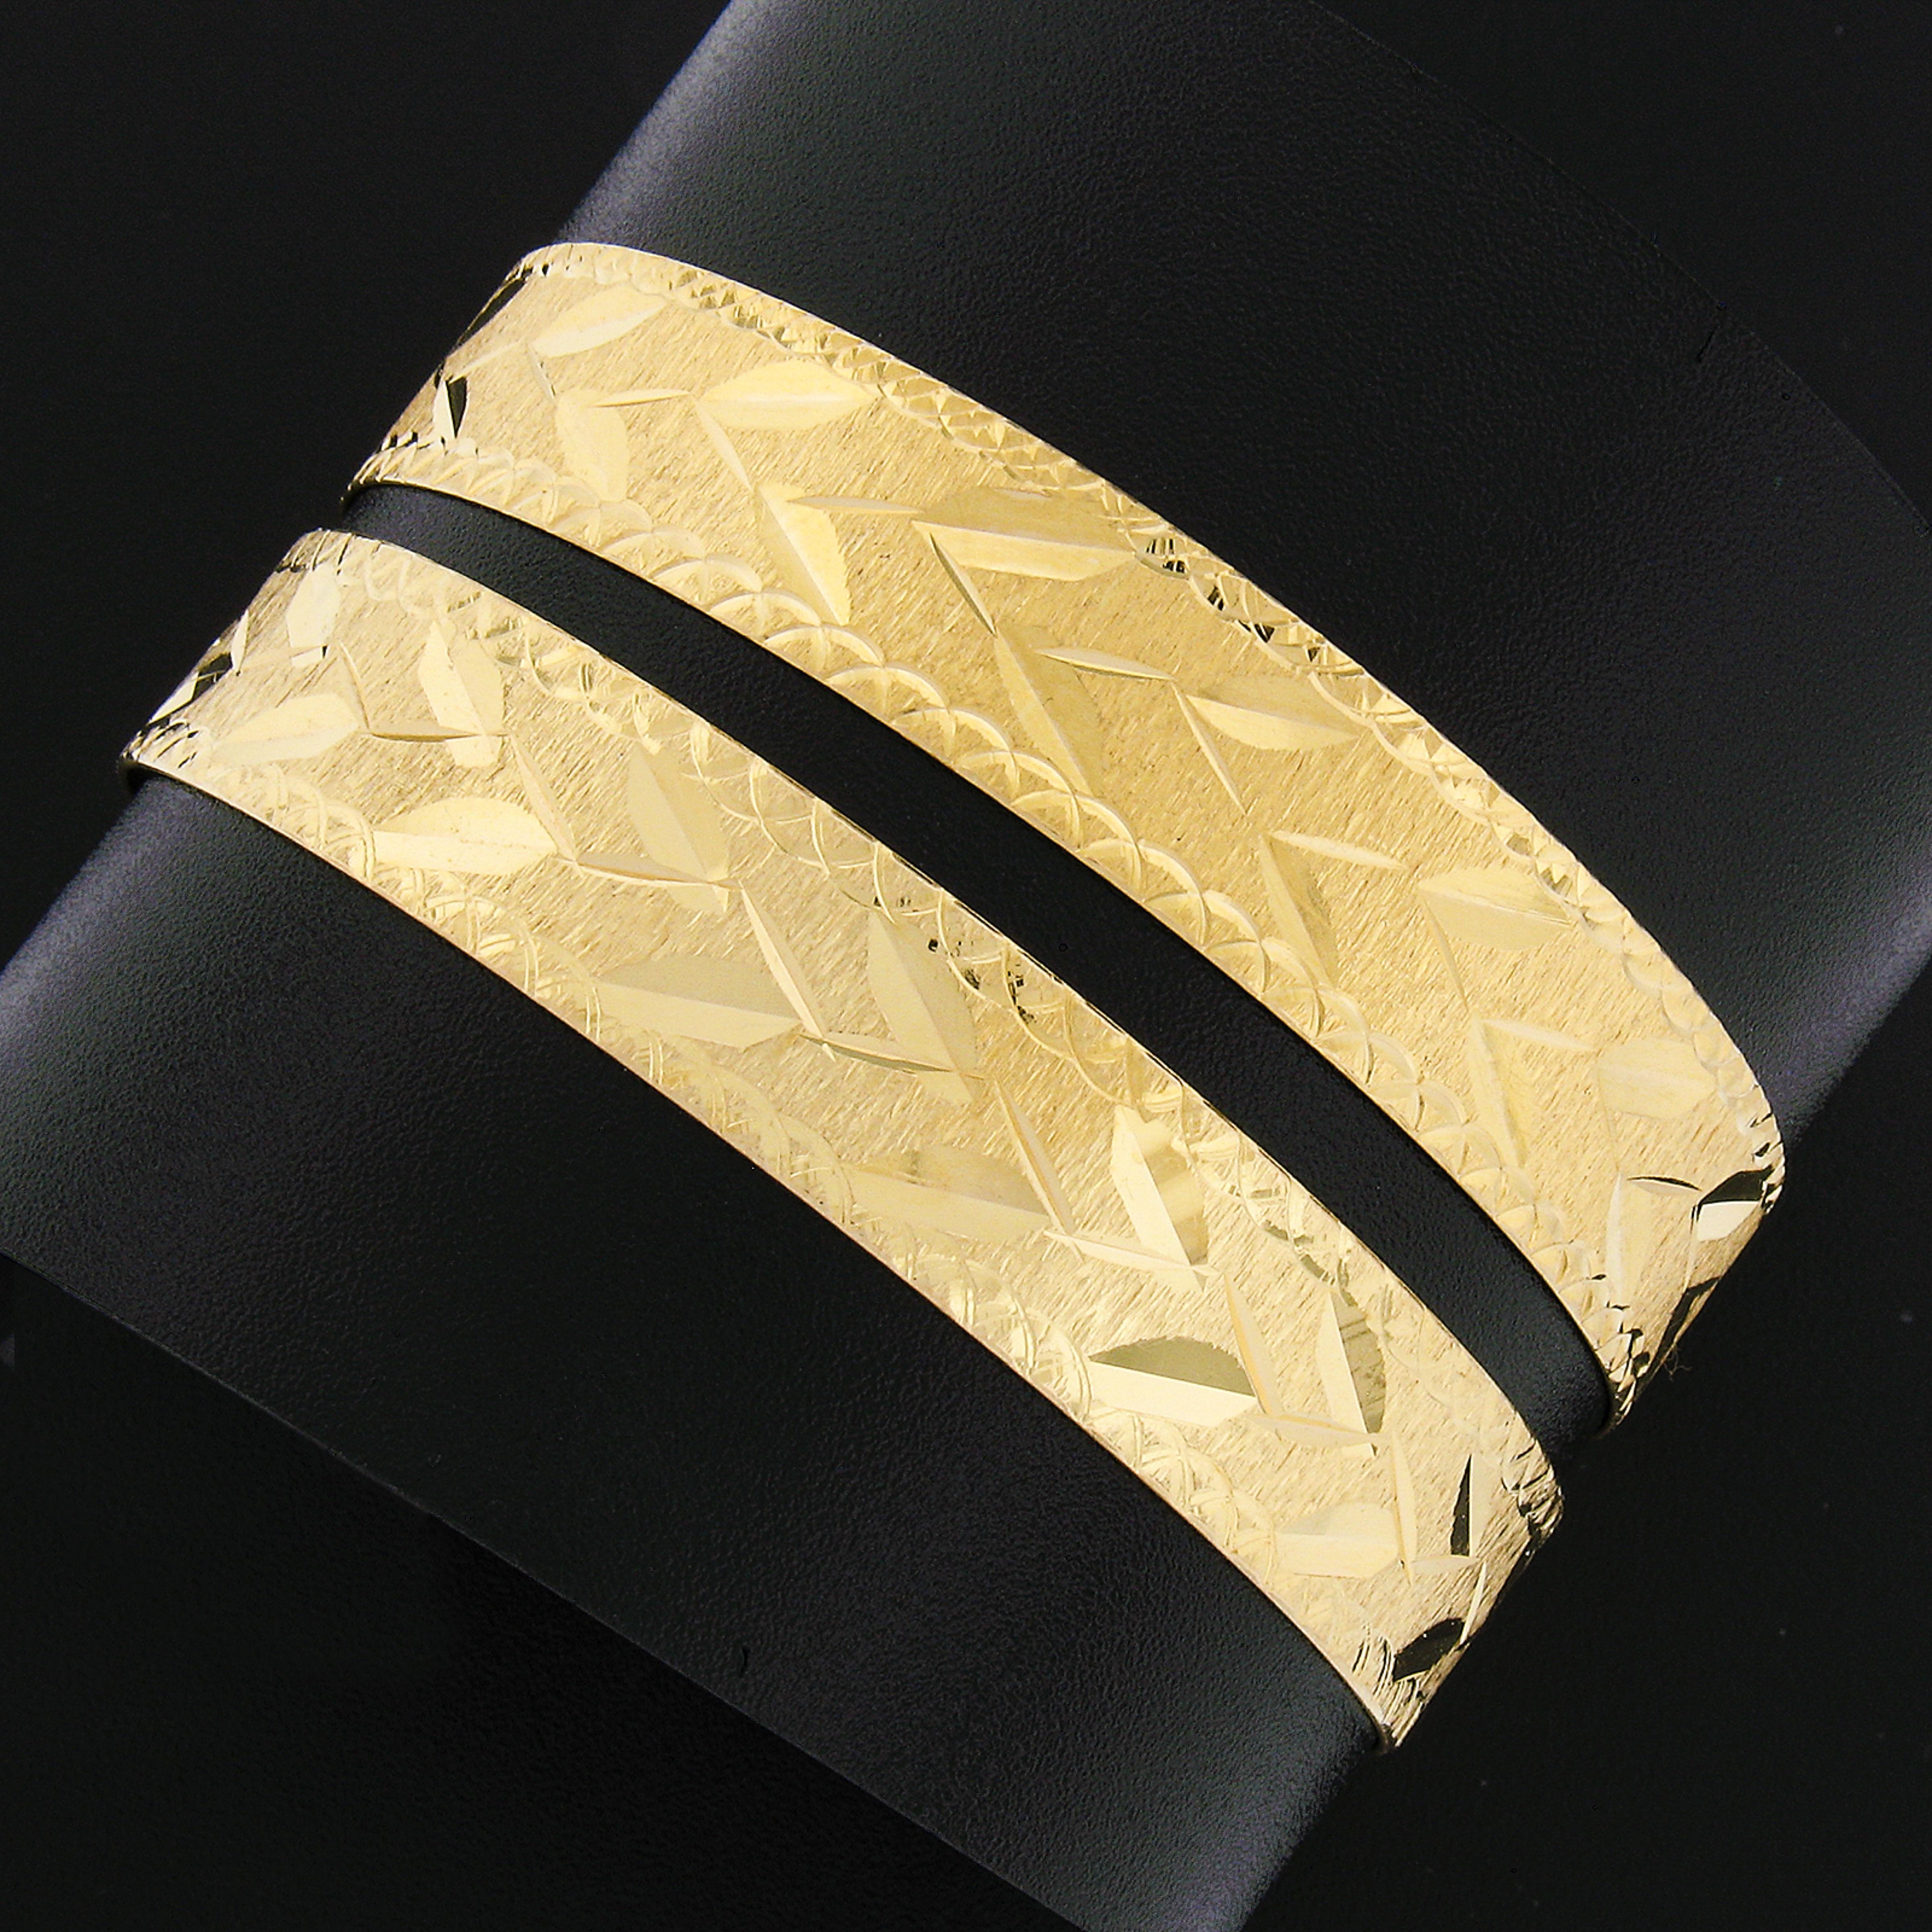 Here we have set of 2 slip-on style bangle bracelets that were crafted in solid 21k yellow gold that were made in Lebanon. They feature a hand engraved diamond cut floral pattern design, and have a wonderful matte finishing throughout for a simply